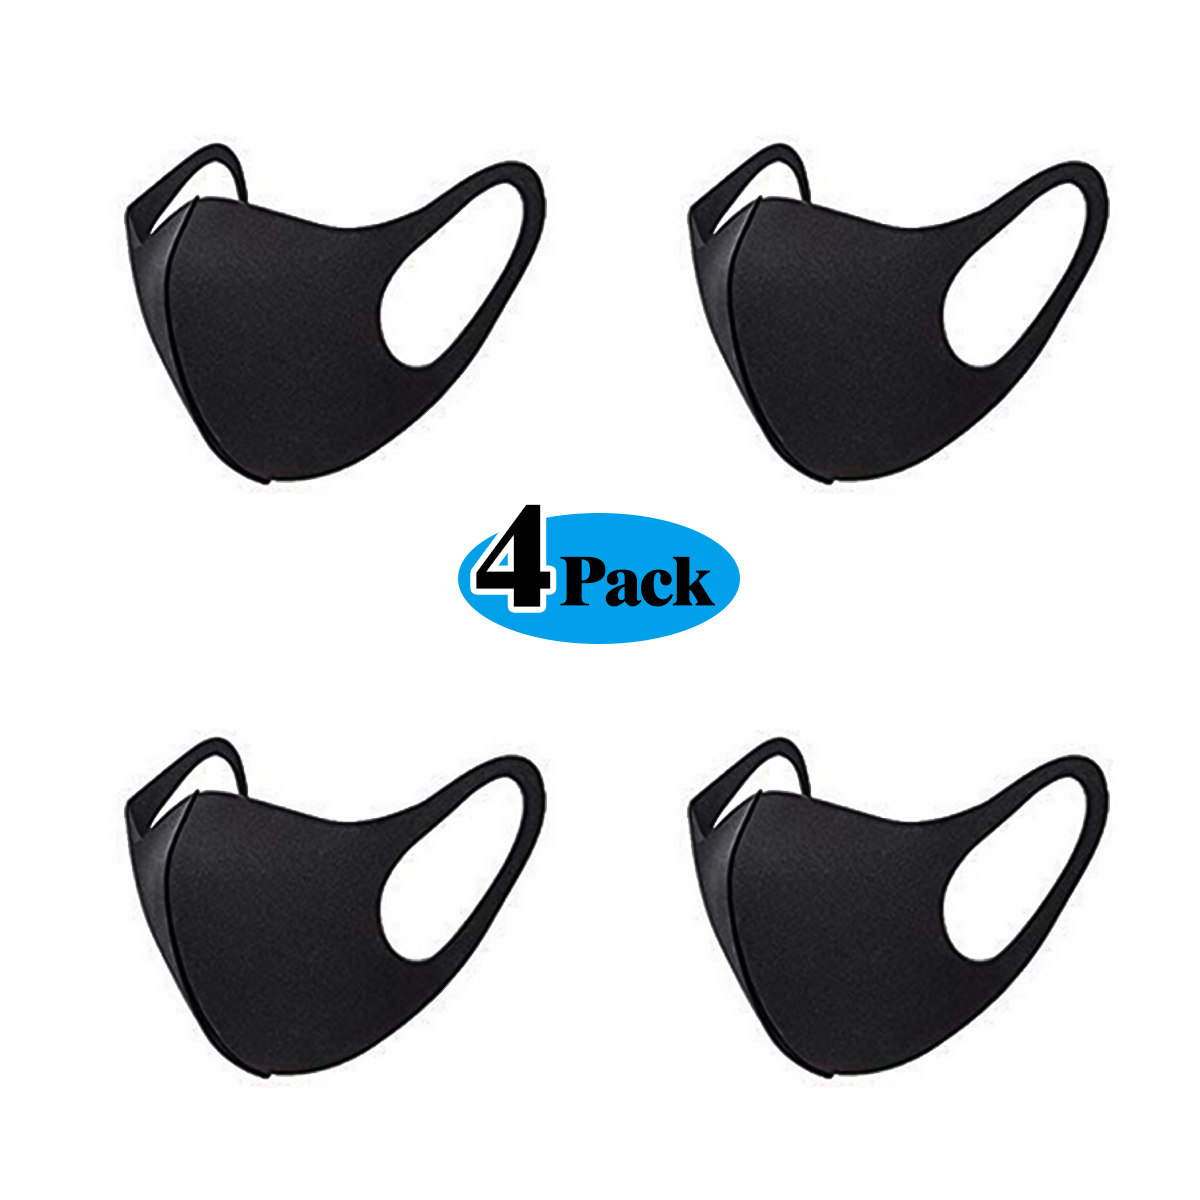 4Pcs Fashion Protective Face Mask Anti Dust Mask Washable Reusable for Cycling Camping Travel